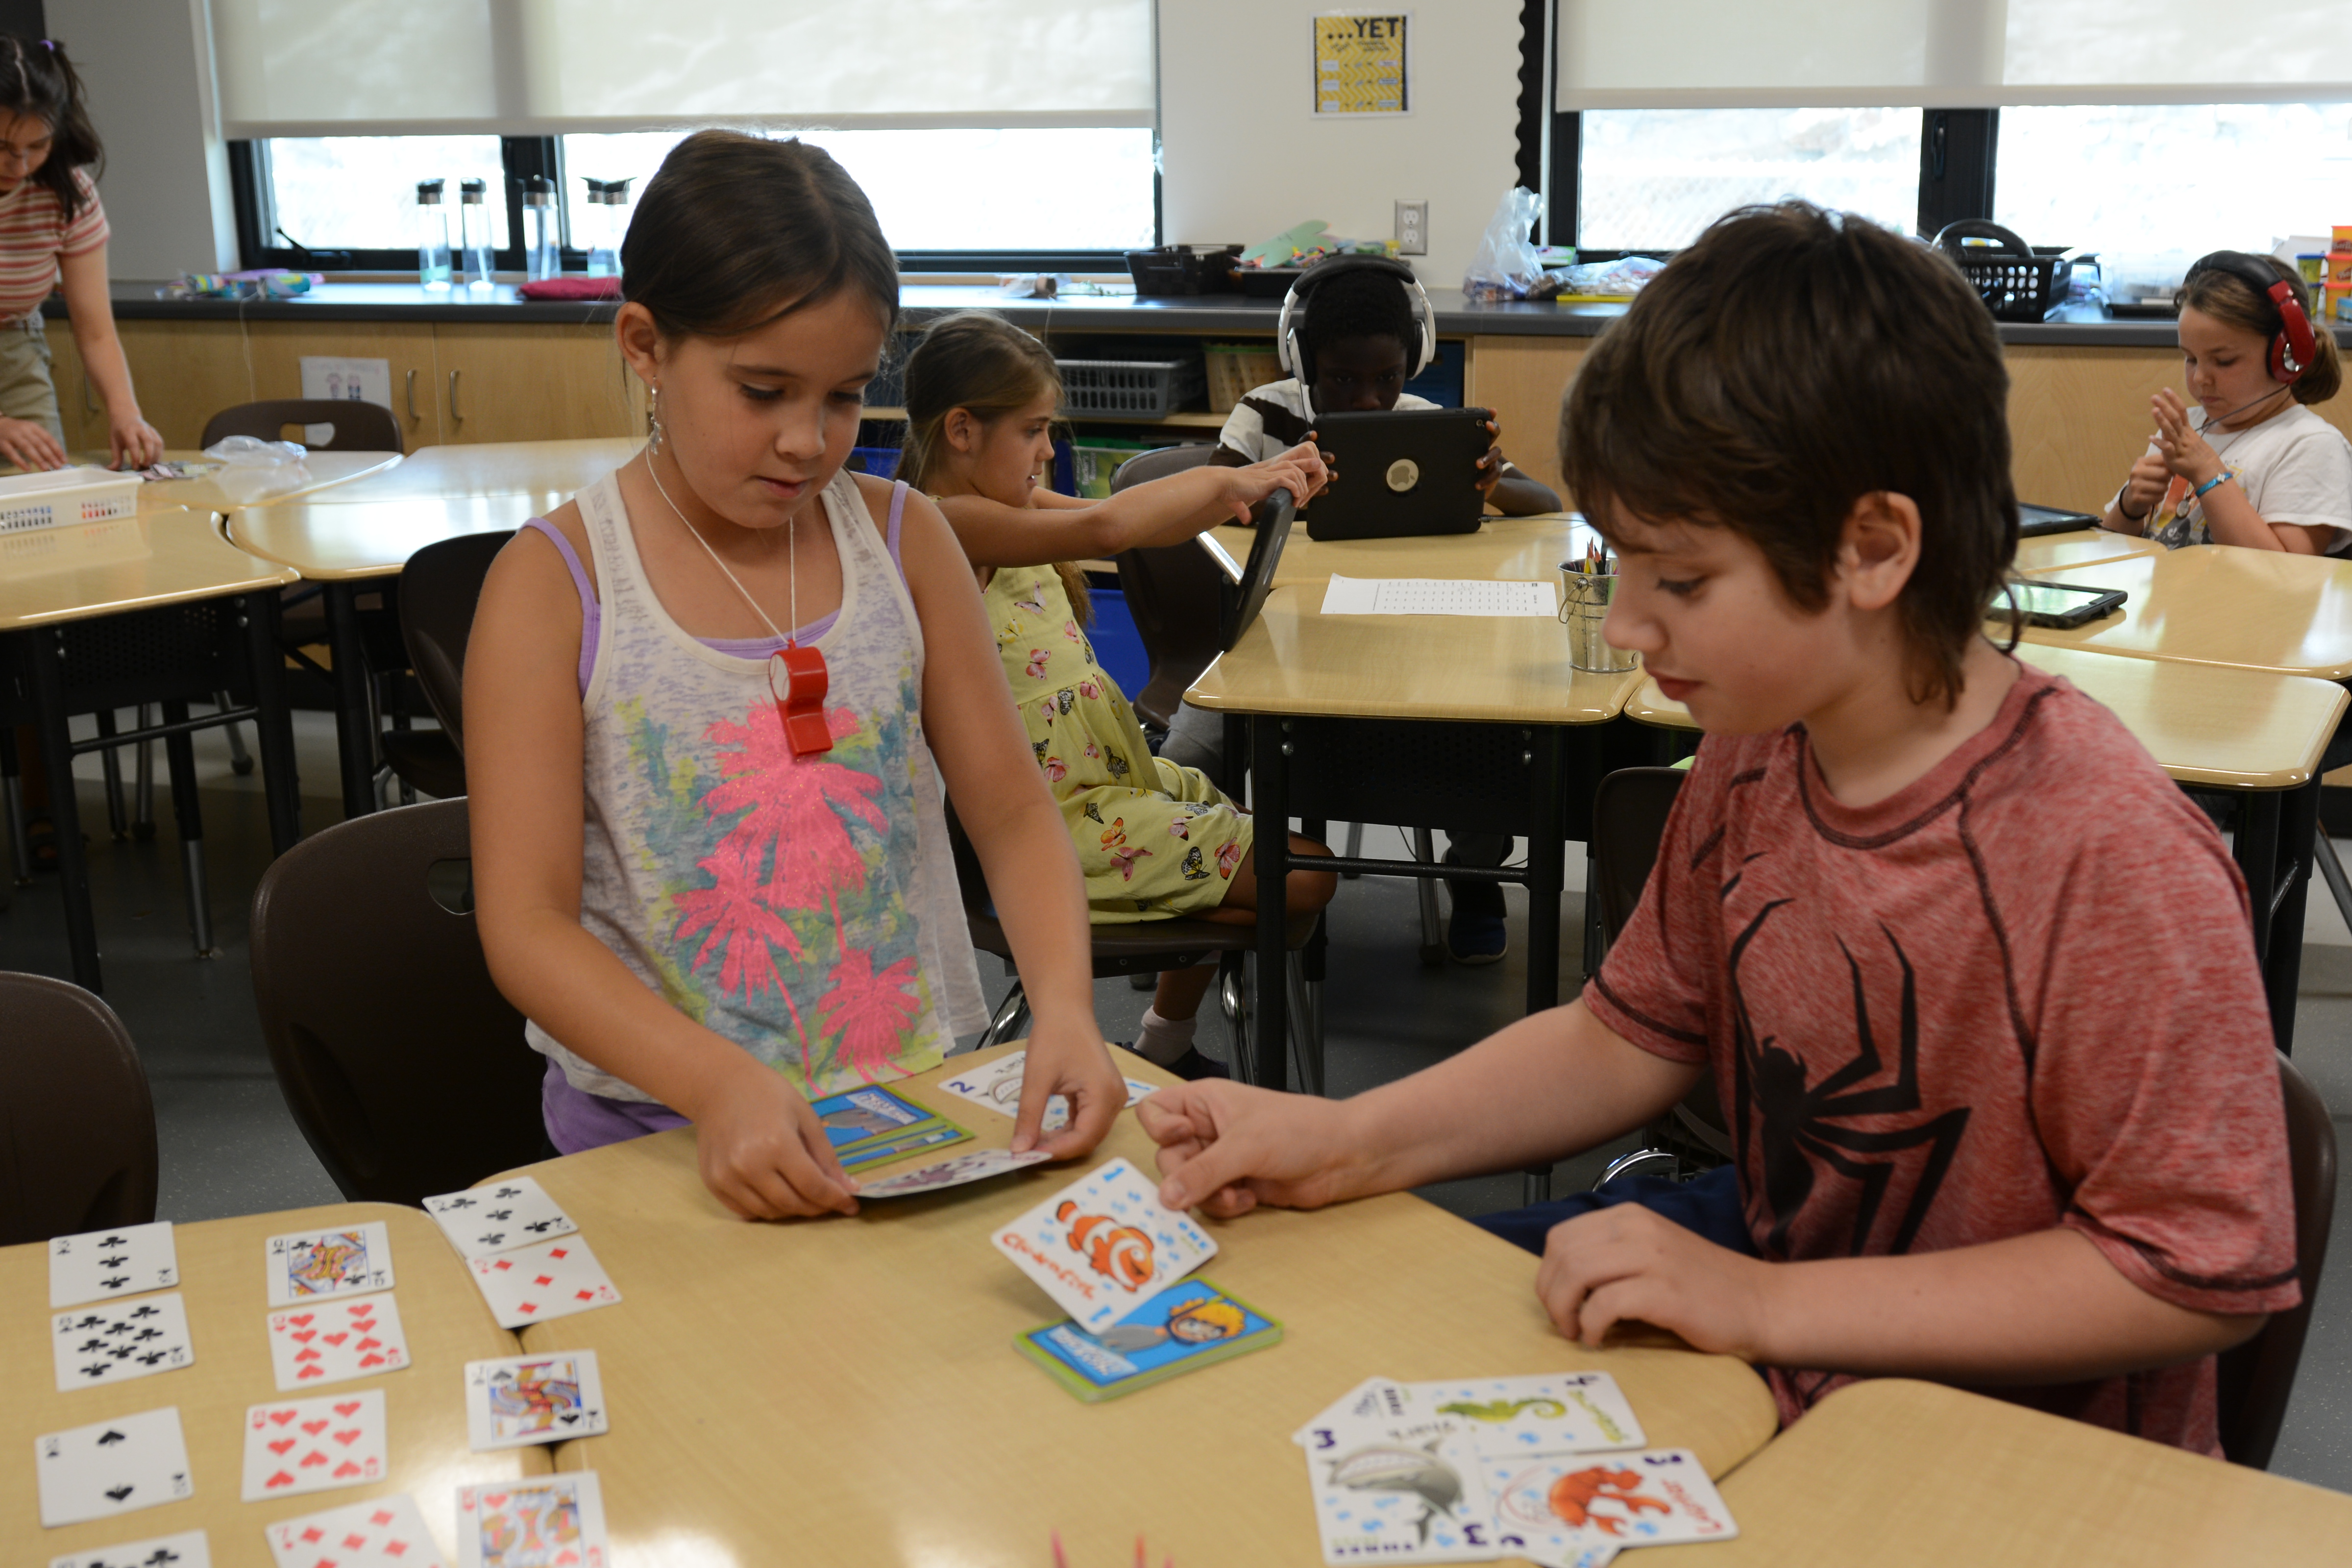 Two students work on their addition by playing a card game.